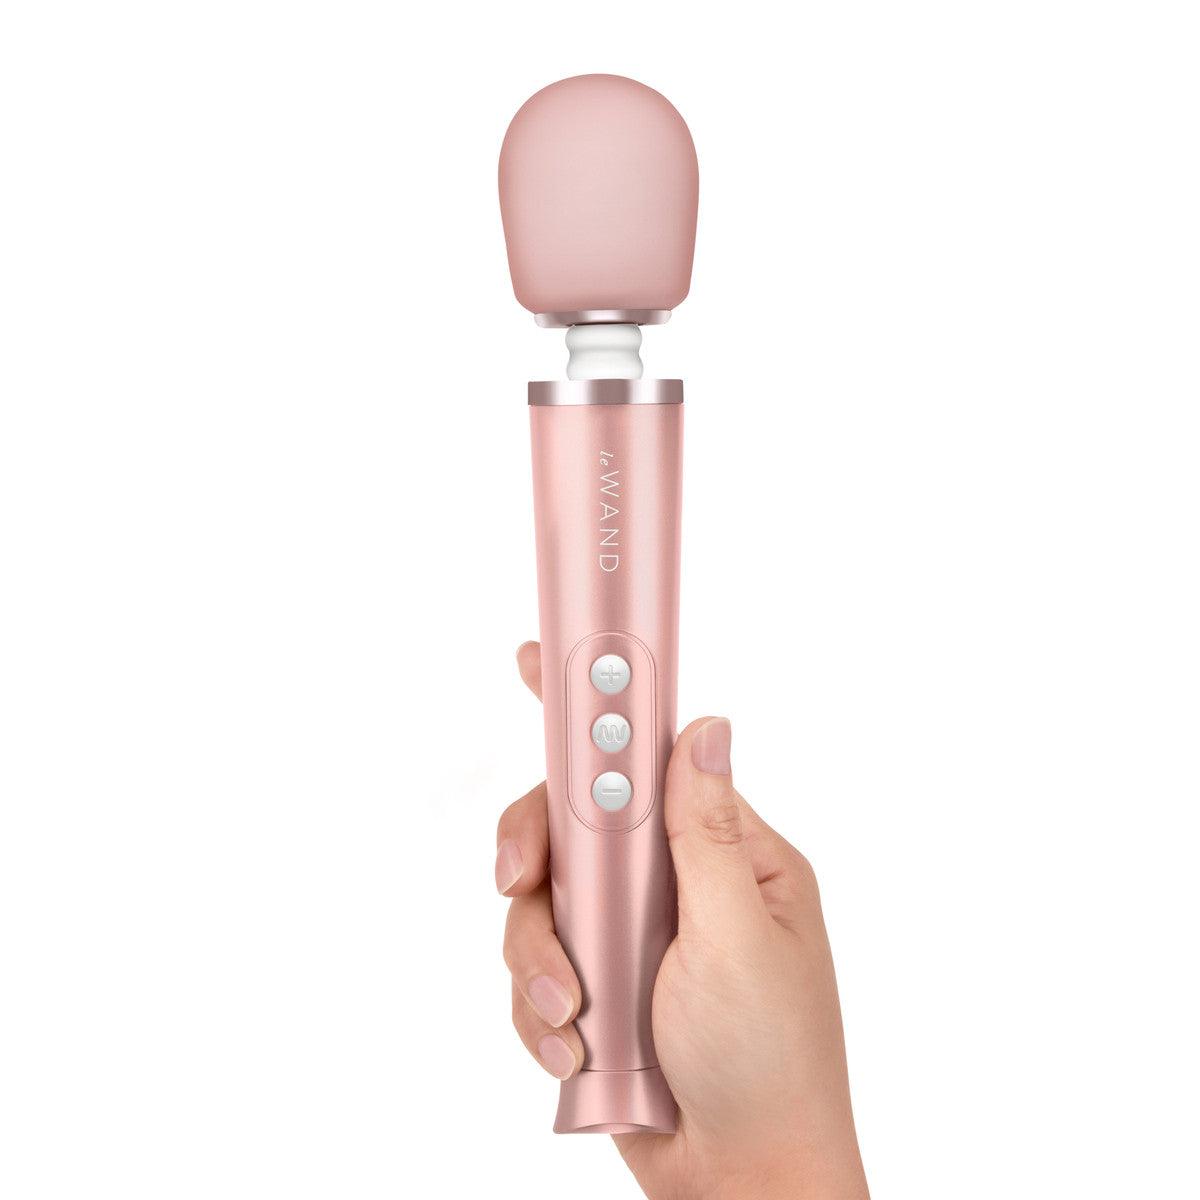 Le Wand Petite Massager - My temptations Adult Toys